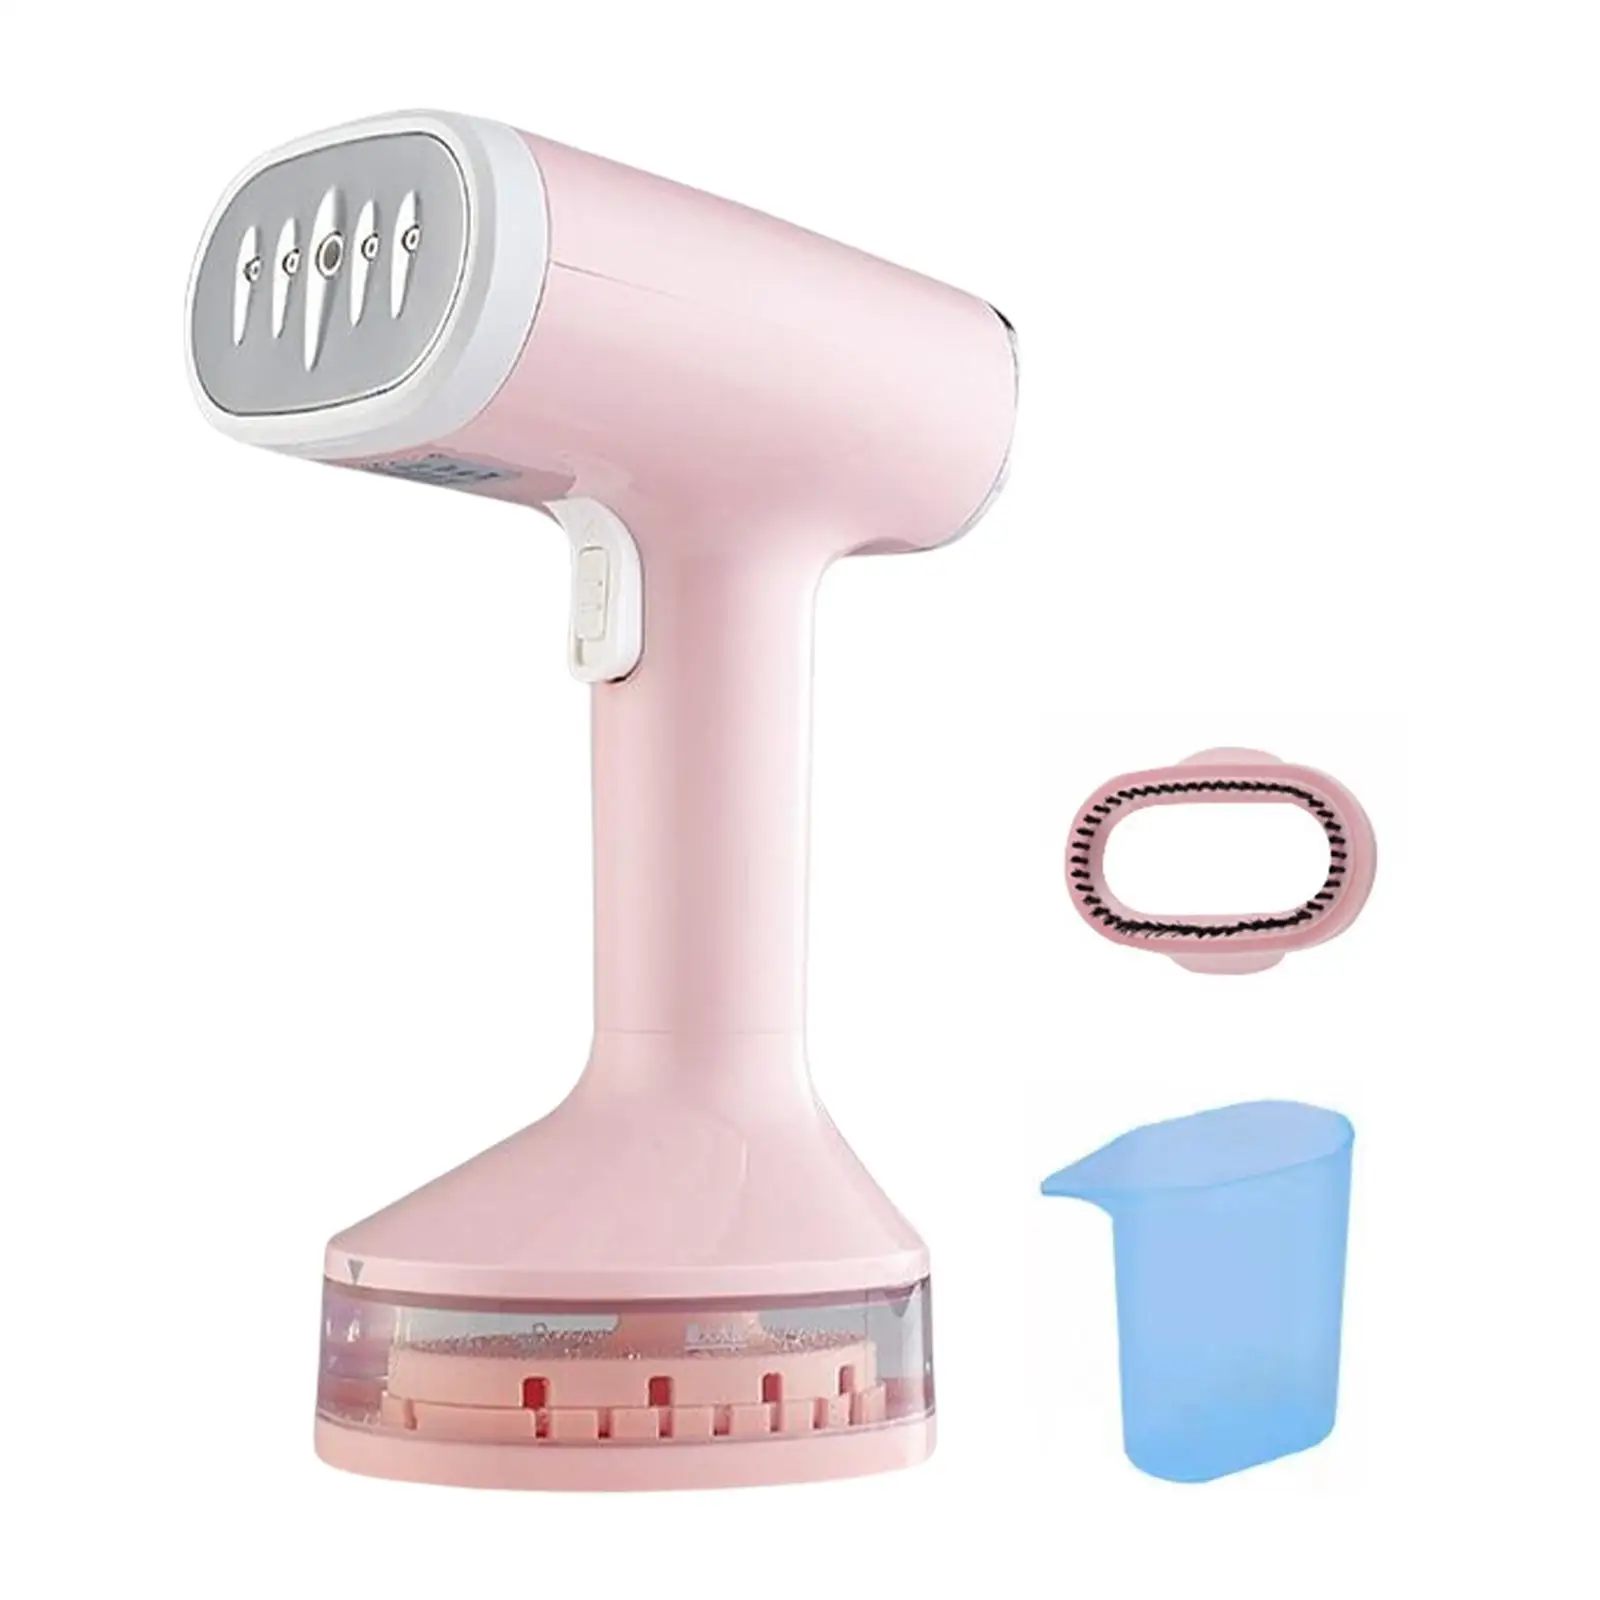 Professional Handheld Garment Steamer UK Plug and Wet Ironing Mini Steam Iron for Travel Outing Household Clothes Ironing